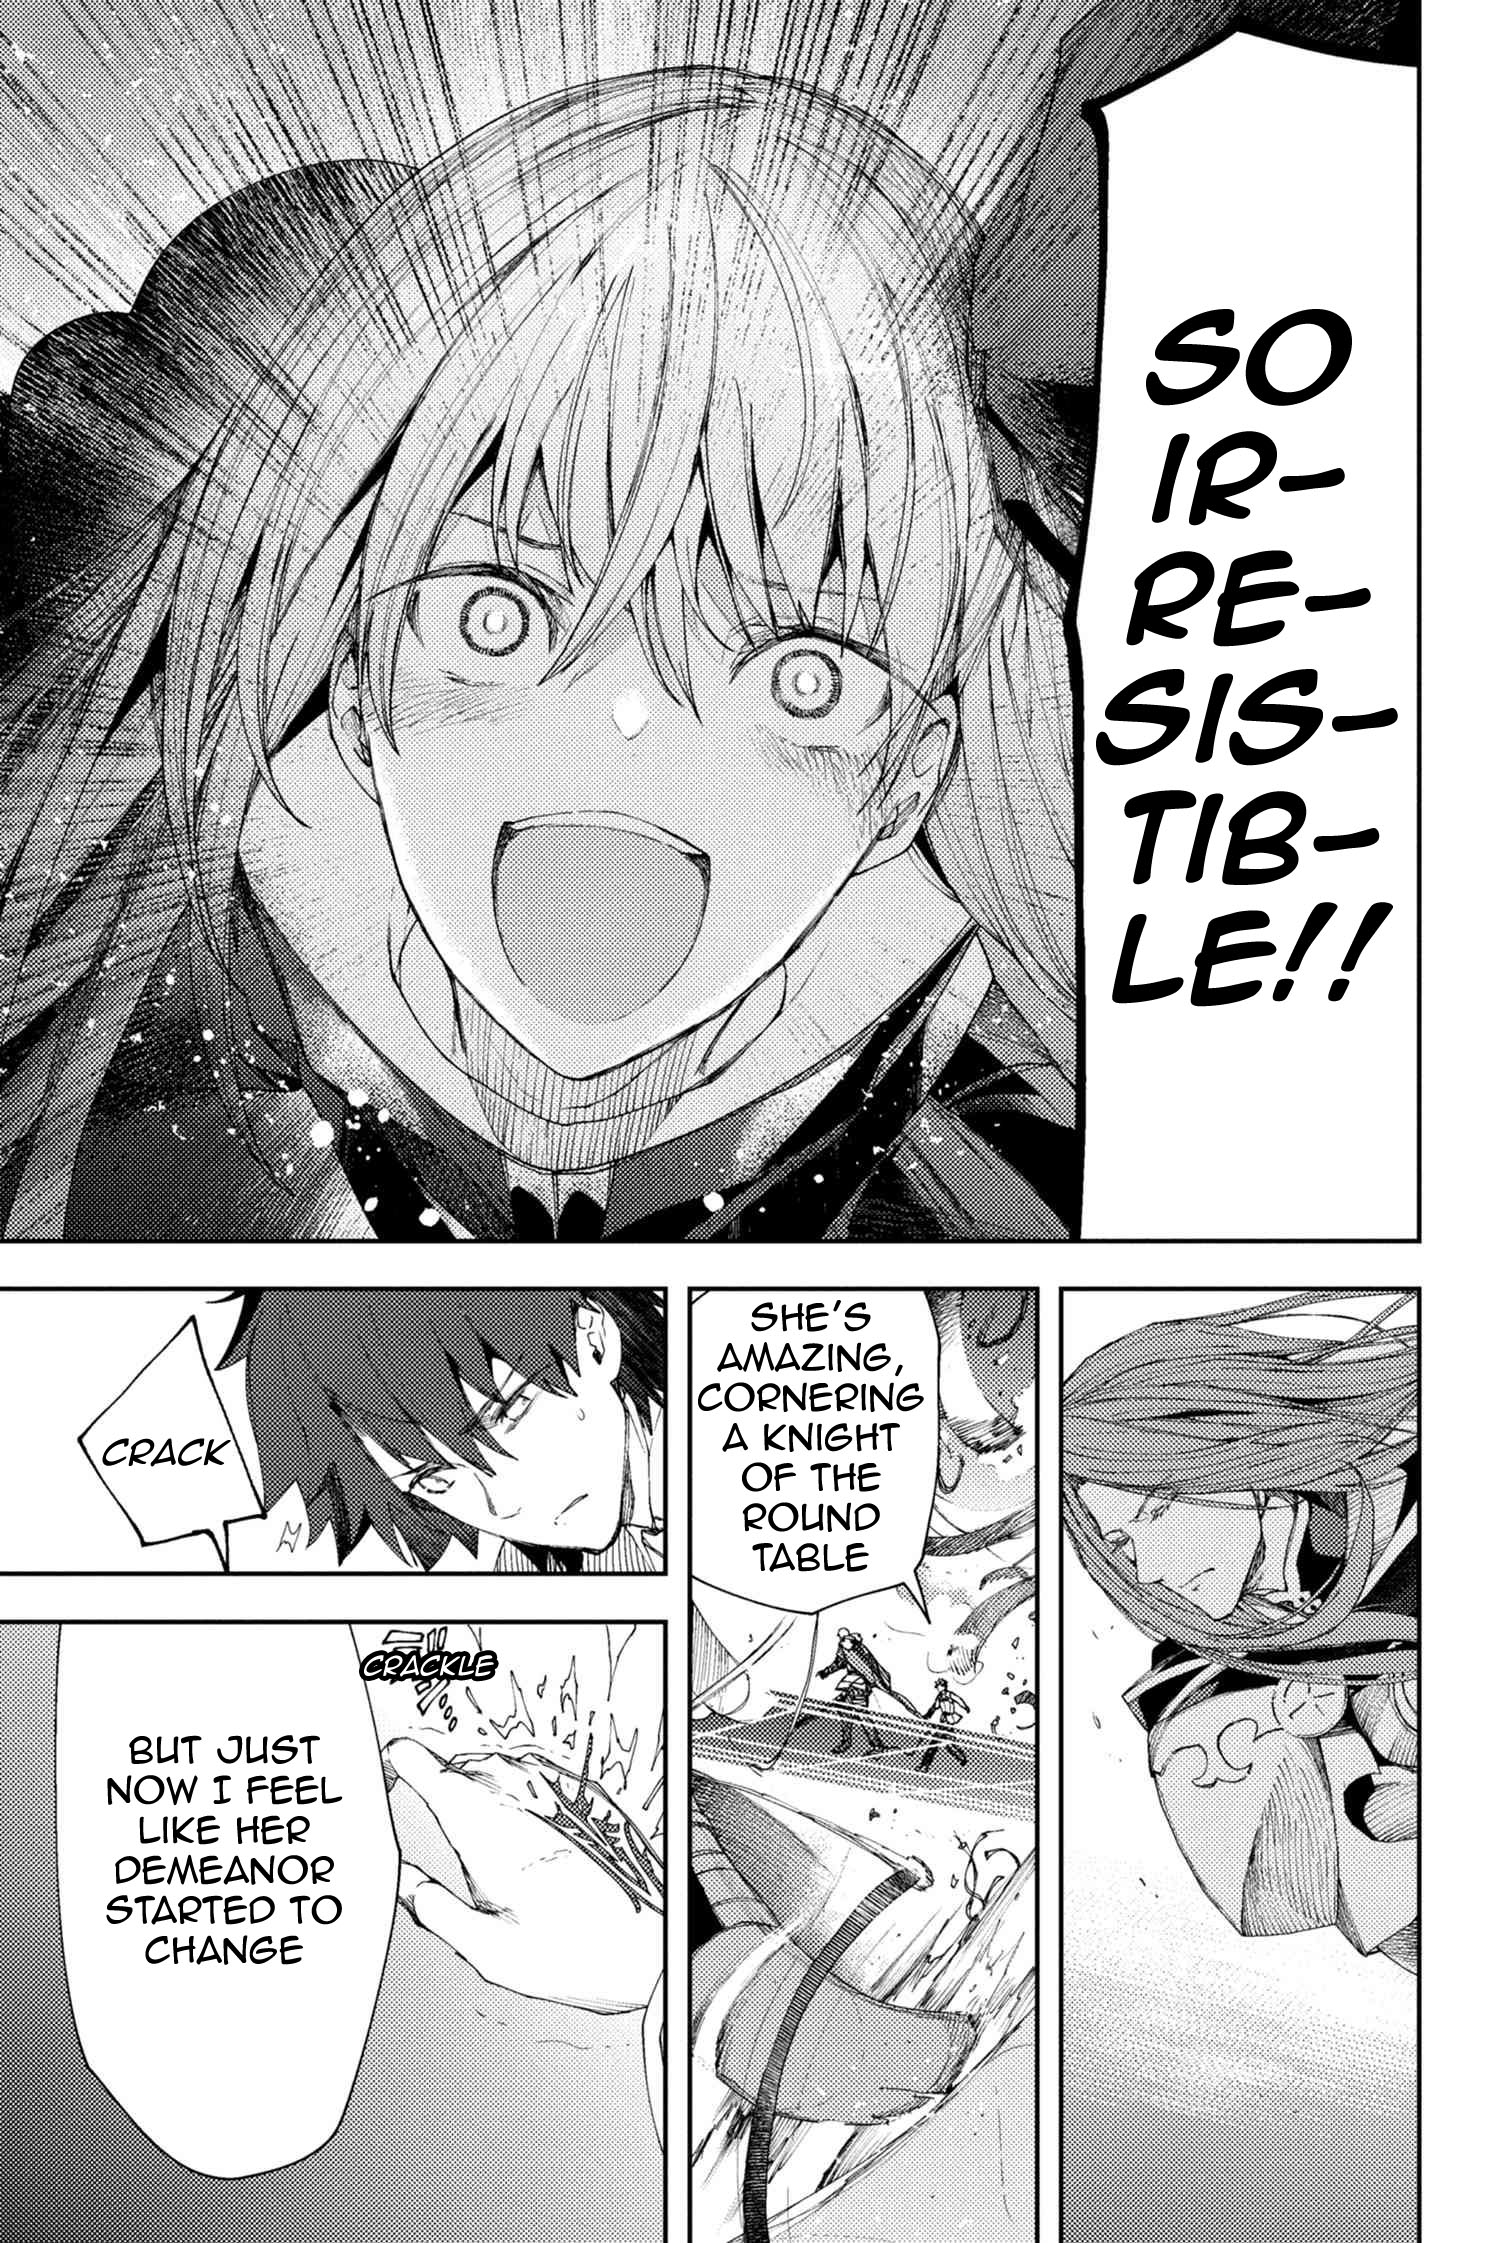 Fate/grand Order -Epic Of Remnant- Deep Sea Cyber-Paradise Se.ra.ph - 5.2 page 9